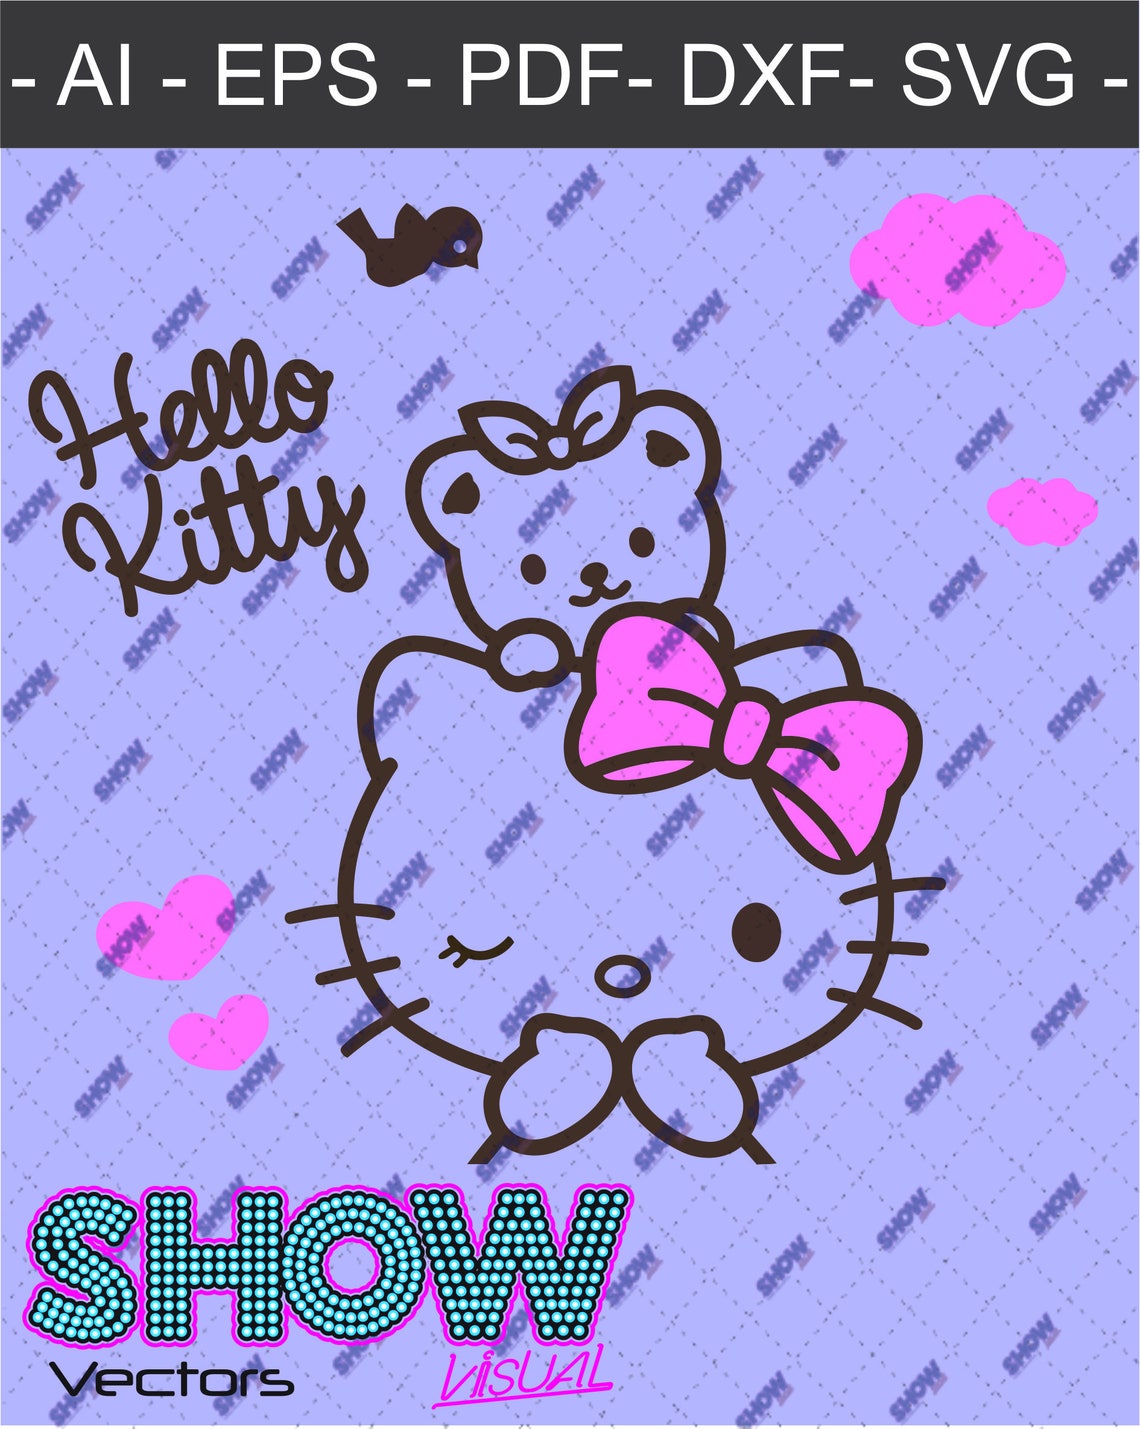 Cute Hello Kitty vector SVG EPS AI pdf dxf for cut | Etsy